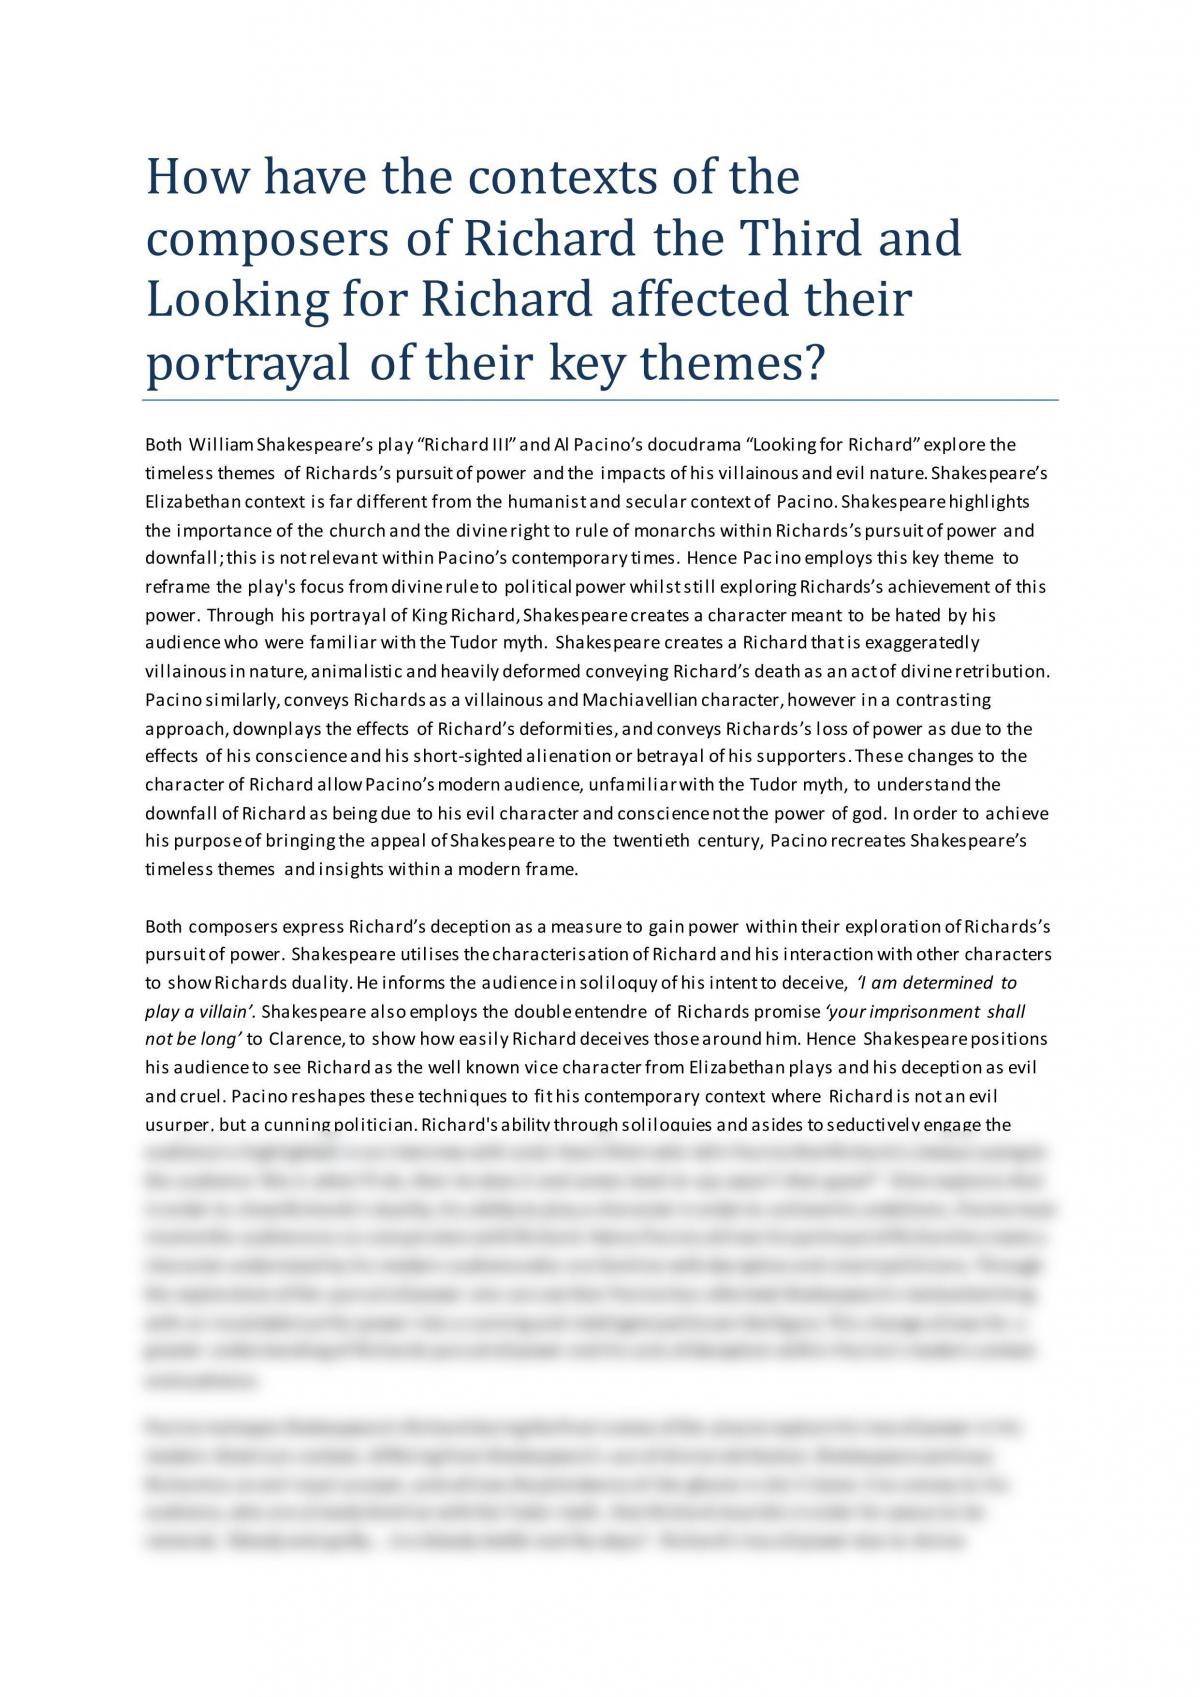 looking for richard essay